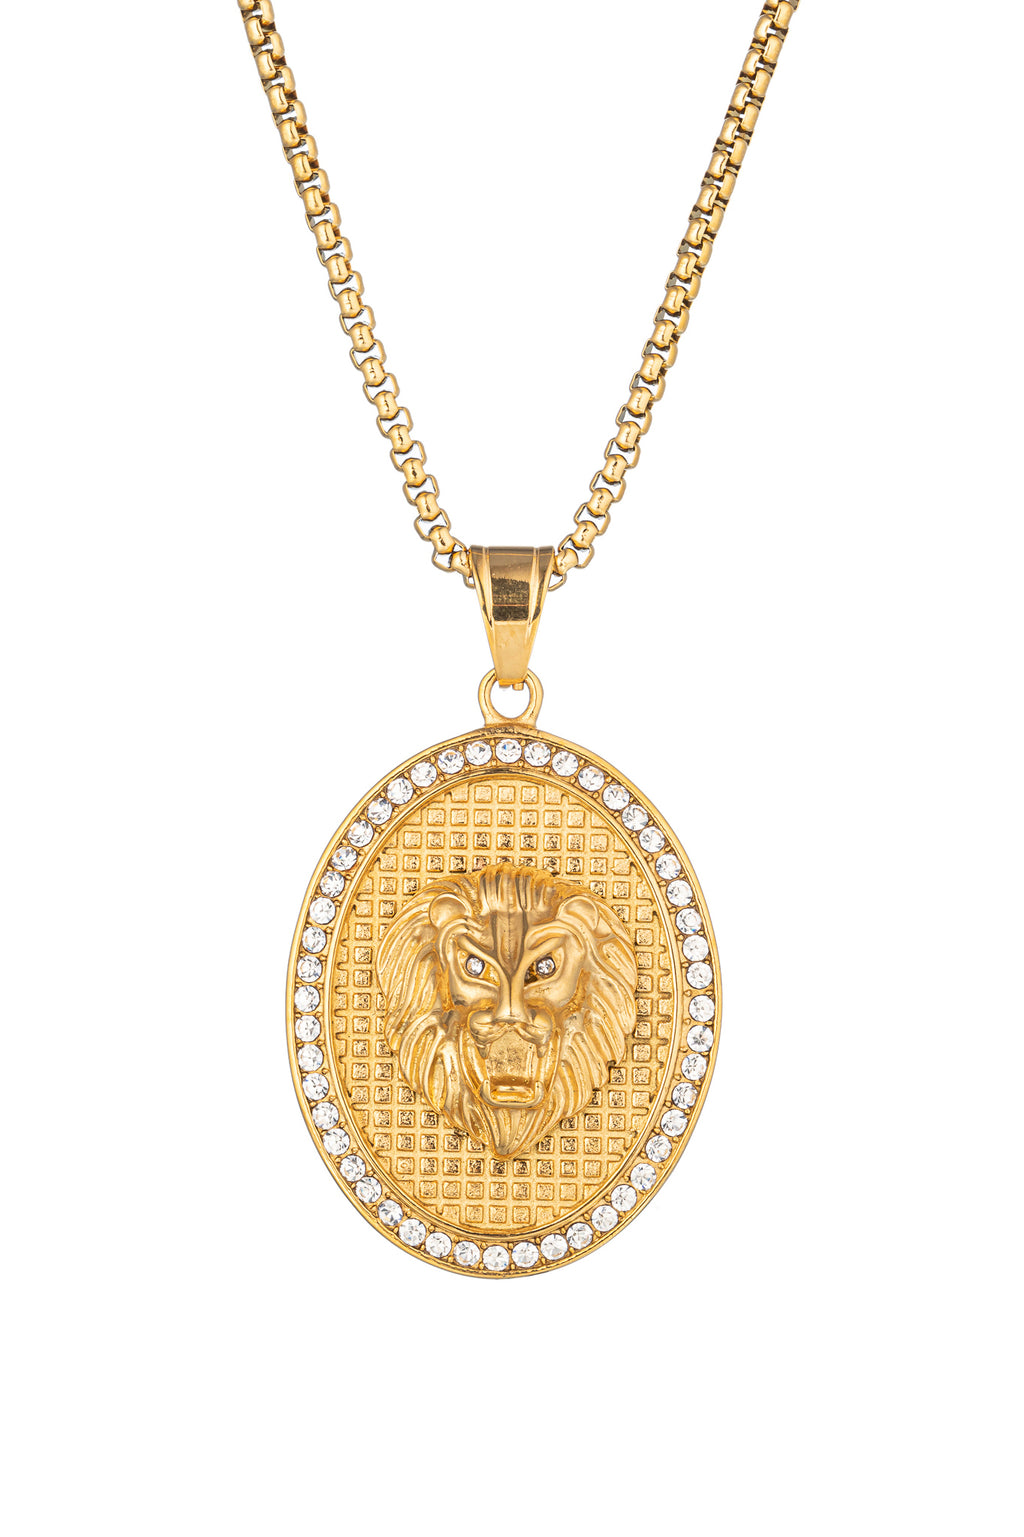 Gold tone titanium lion seal pendant necklace studded with CZ crystals.